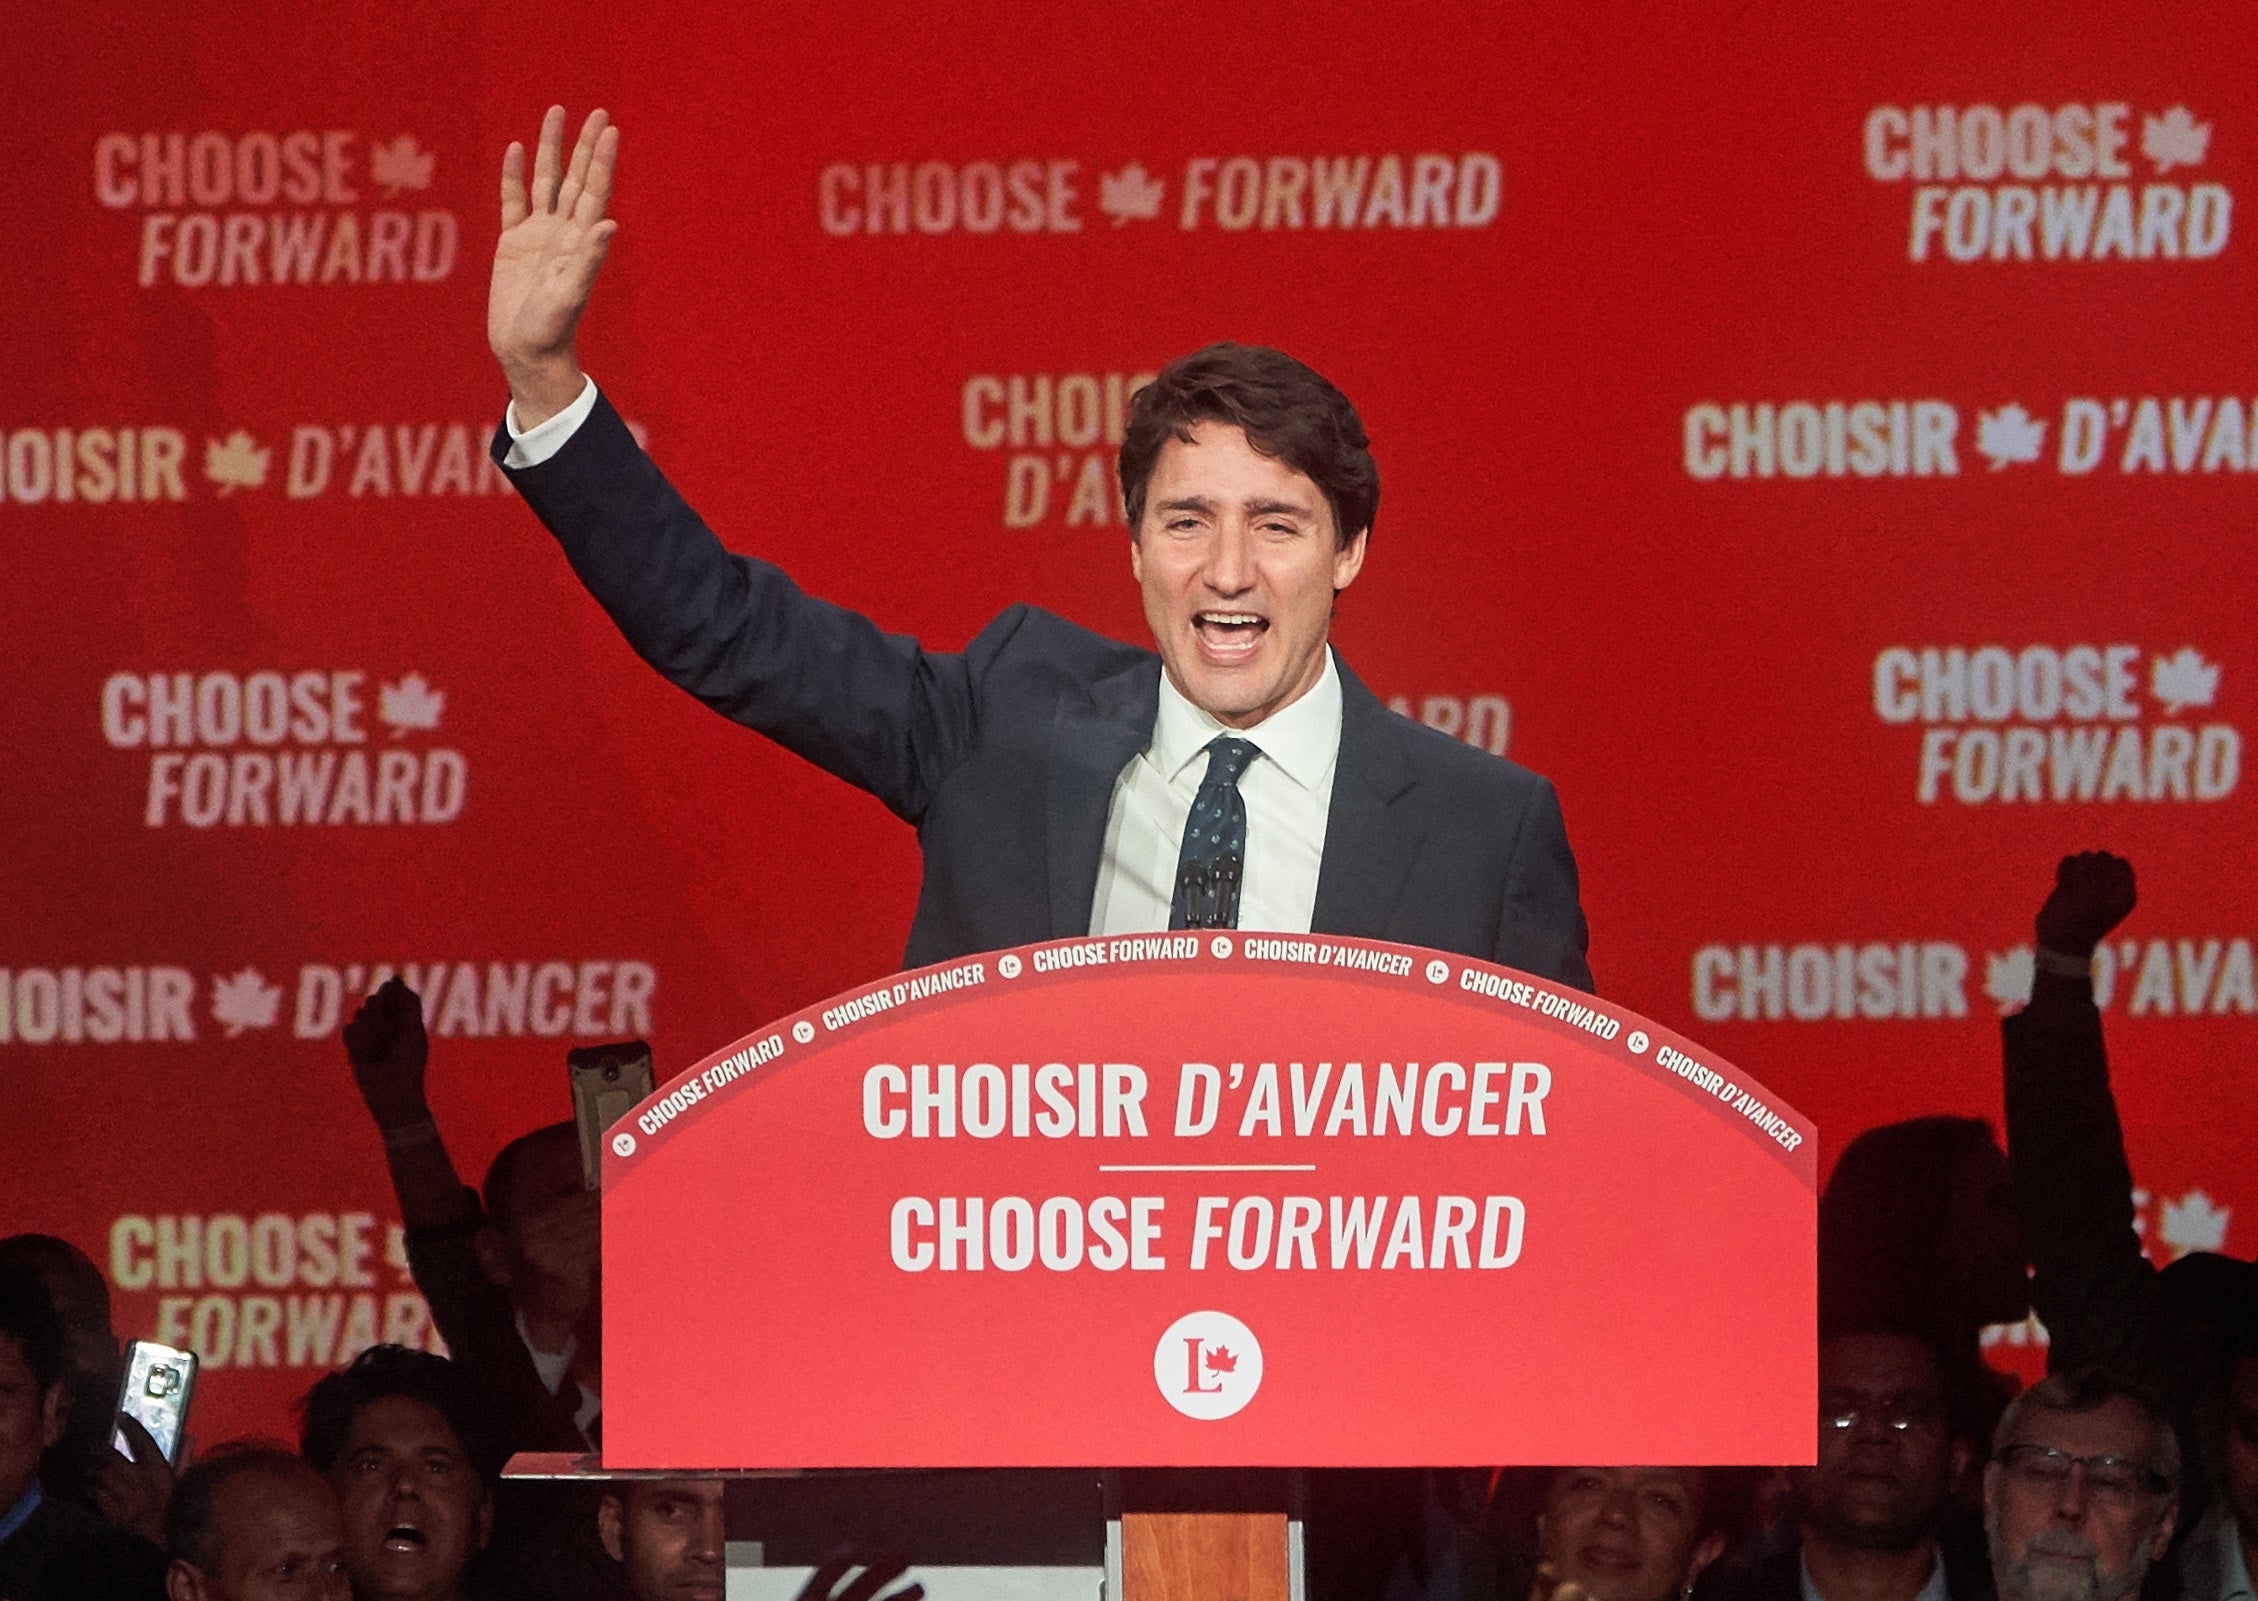 I used to be senior Canadian government adviser — and I know Trudeau's victory isn't what it seems